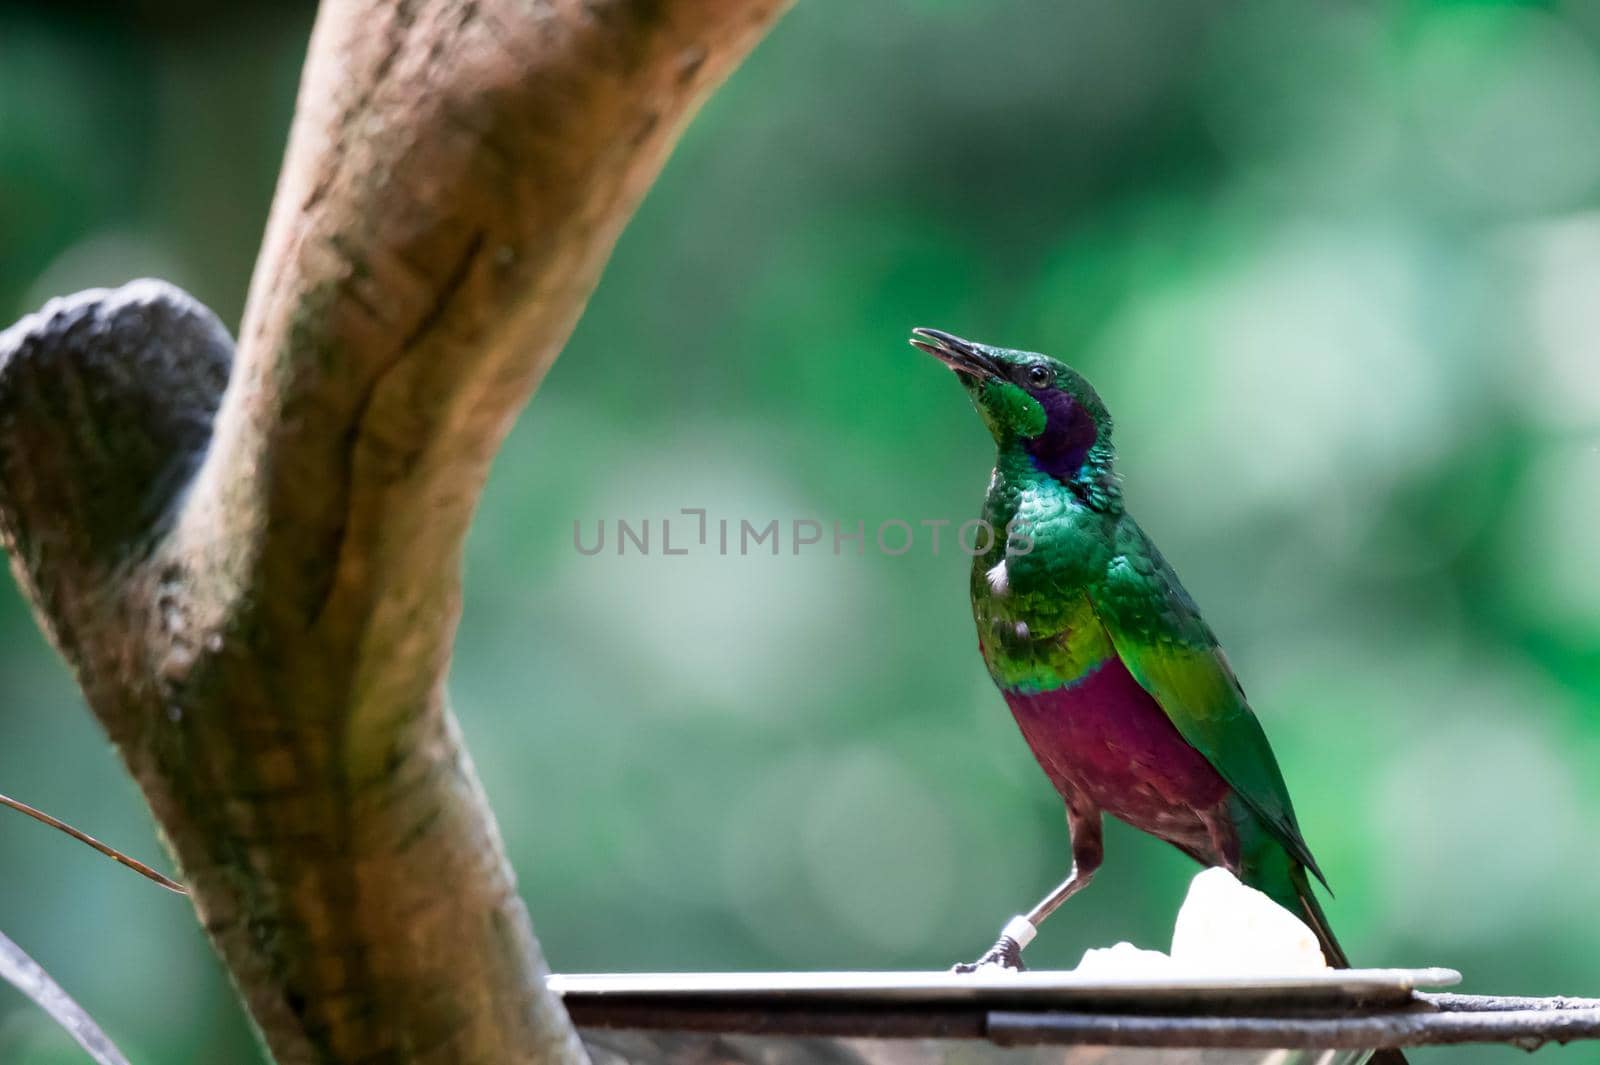 An emerald starling (Lamprotornis iris) is also known as the iris glossy starling. It is found in West Africa in the lowlands and savanna of Cte d'Ivoire, Guinea, and Sierra Leone